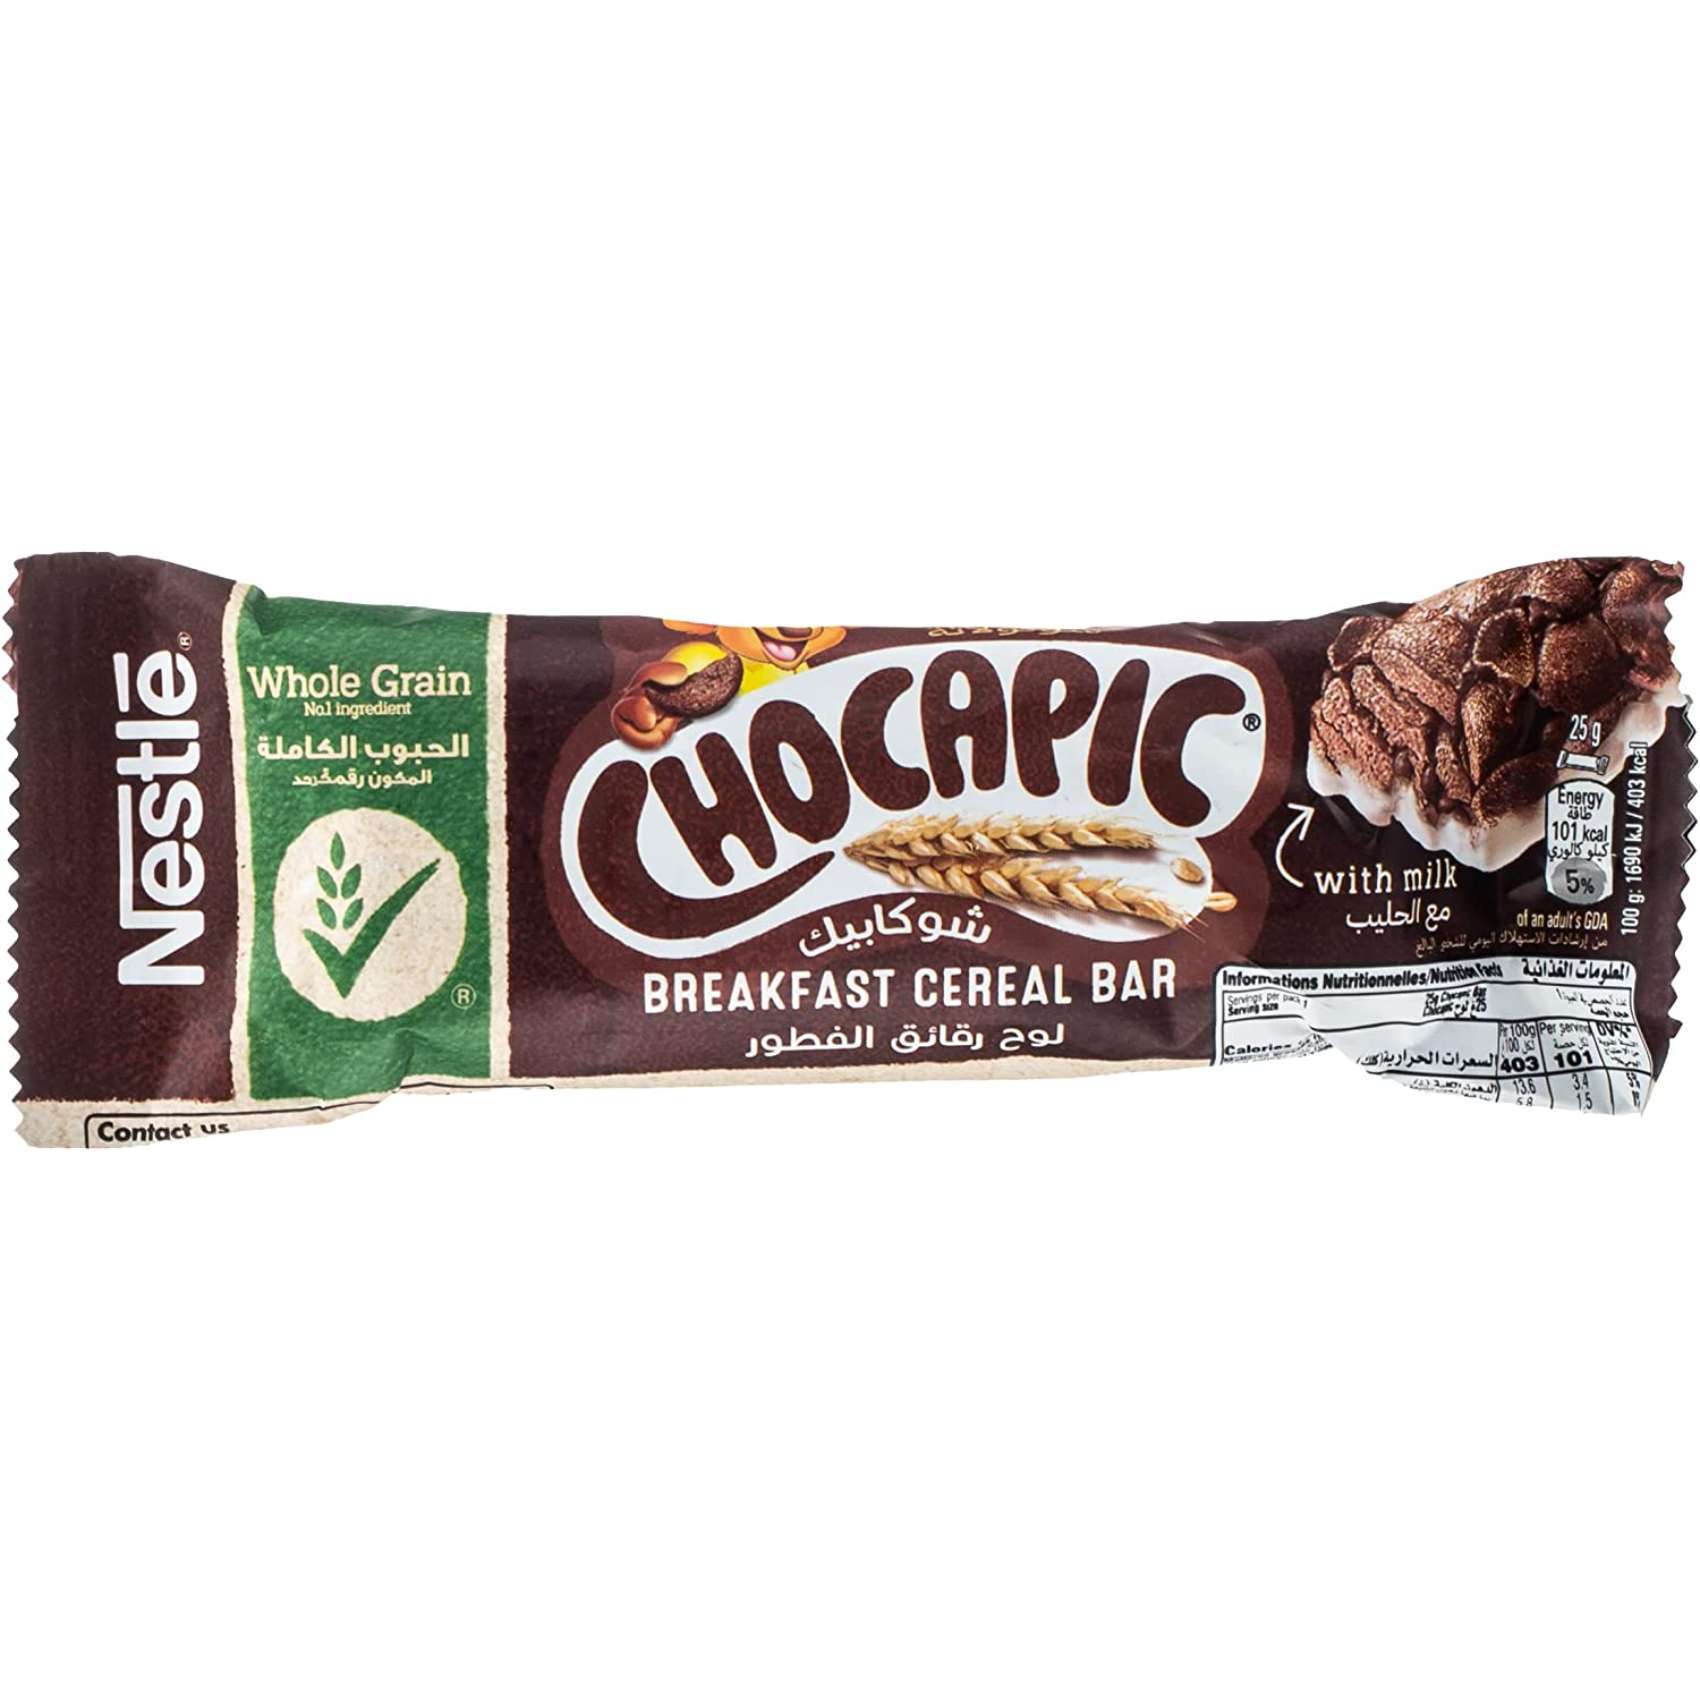 Chocapic - Chocolate Breakfast Cereal